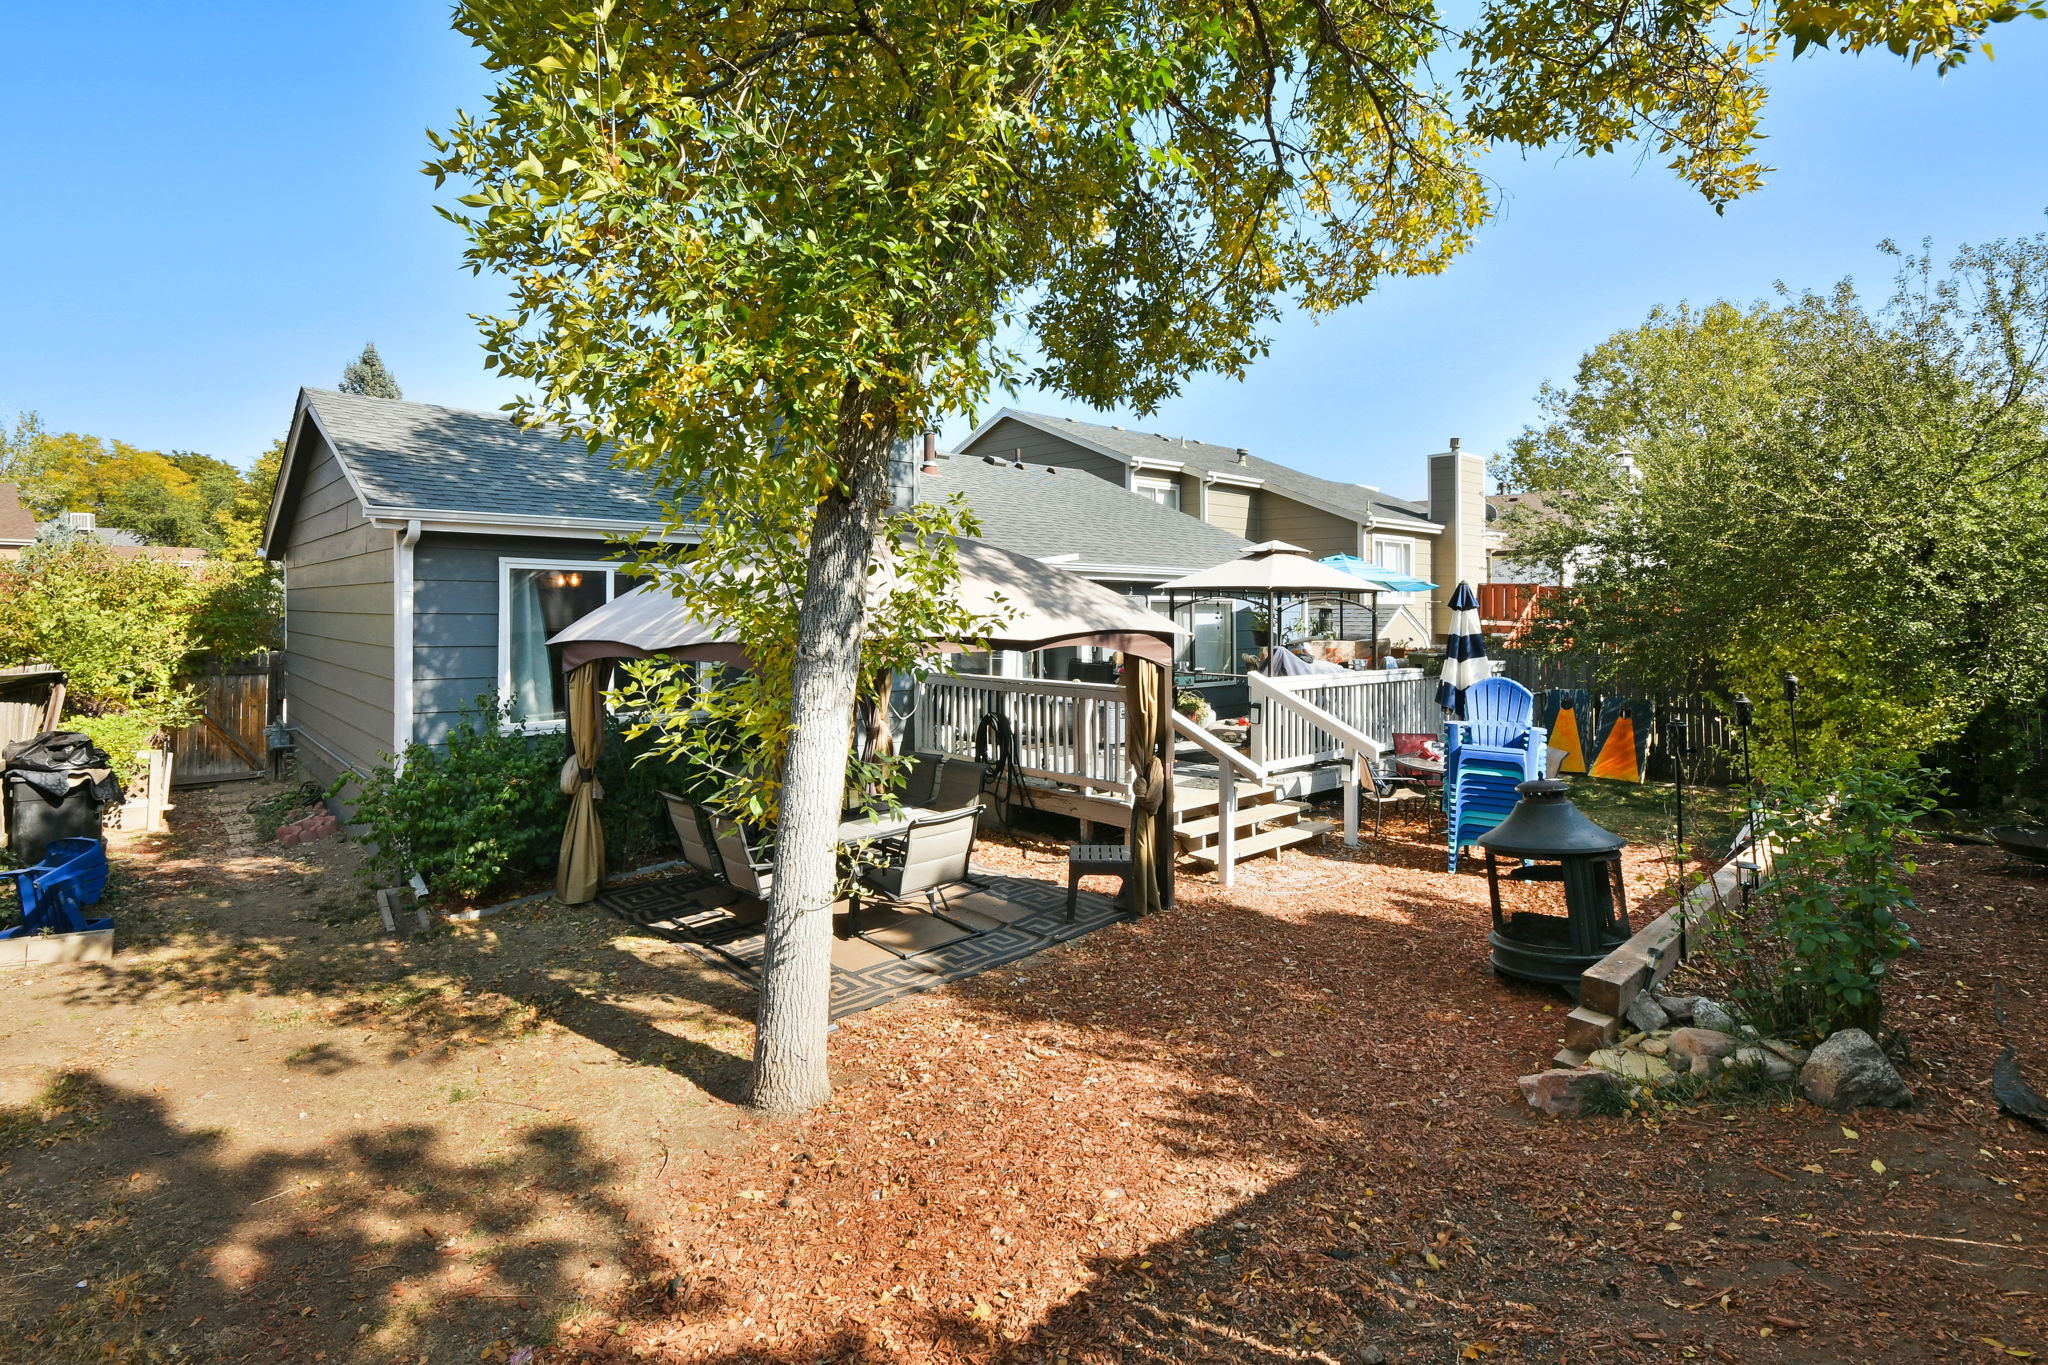  9885 Garland Dr, Westminster, CO 80021, US Photo 21